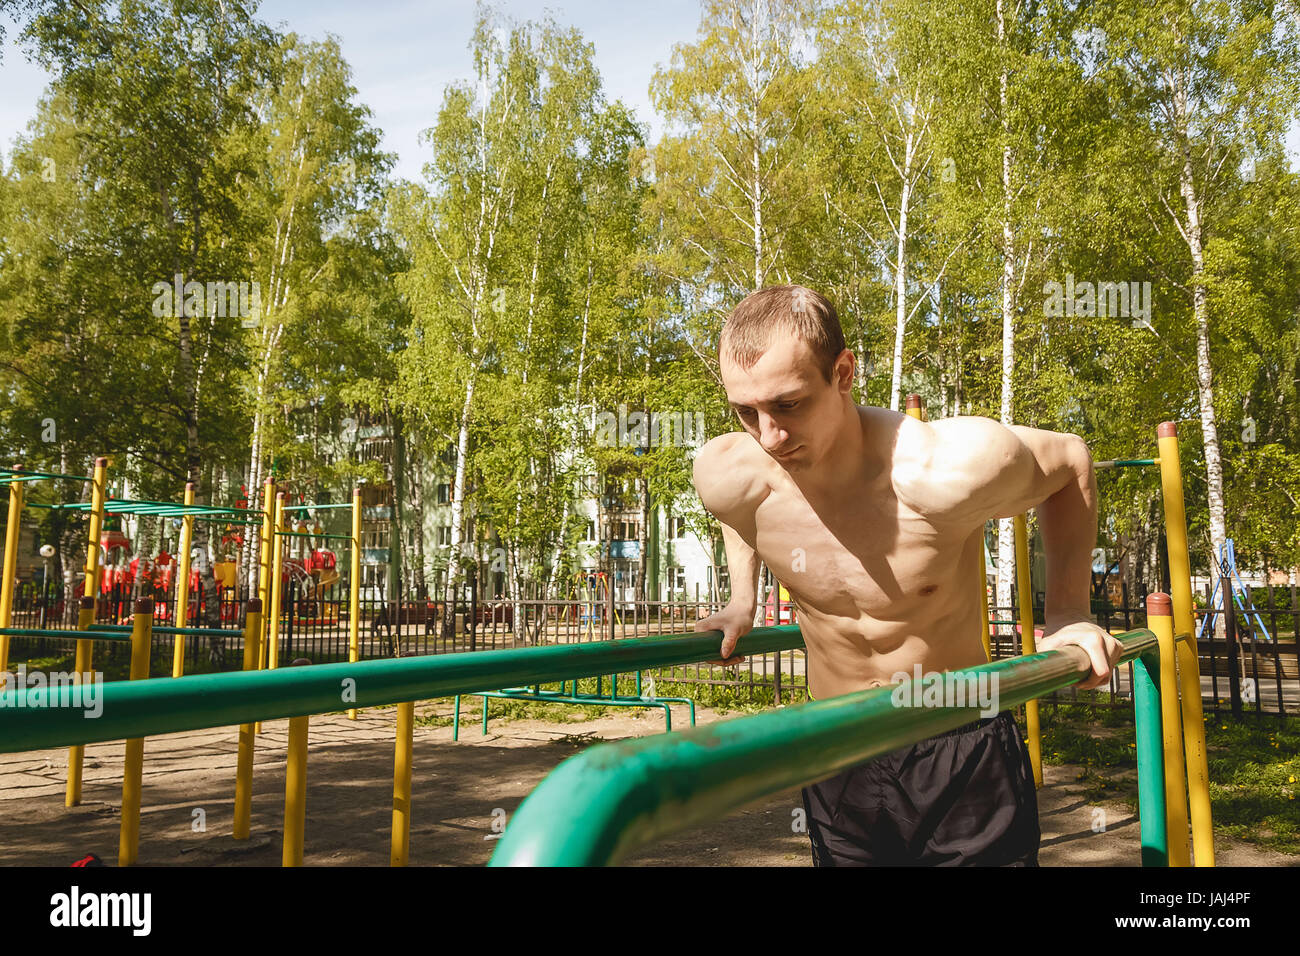 Fitness man at the bar. Exercising outdoors in the Park. Street workout. Stock Photo